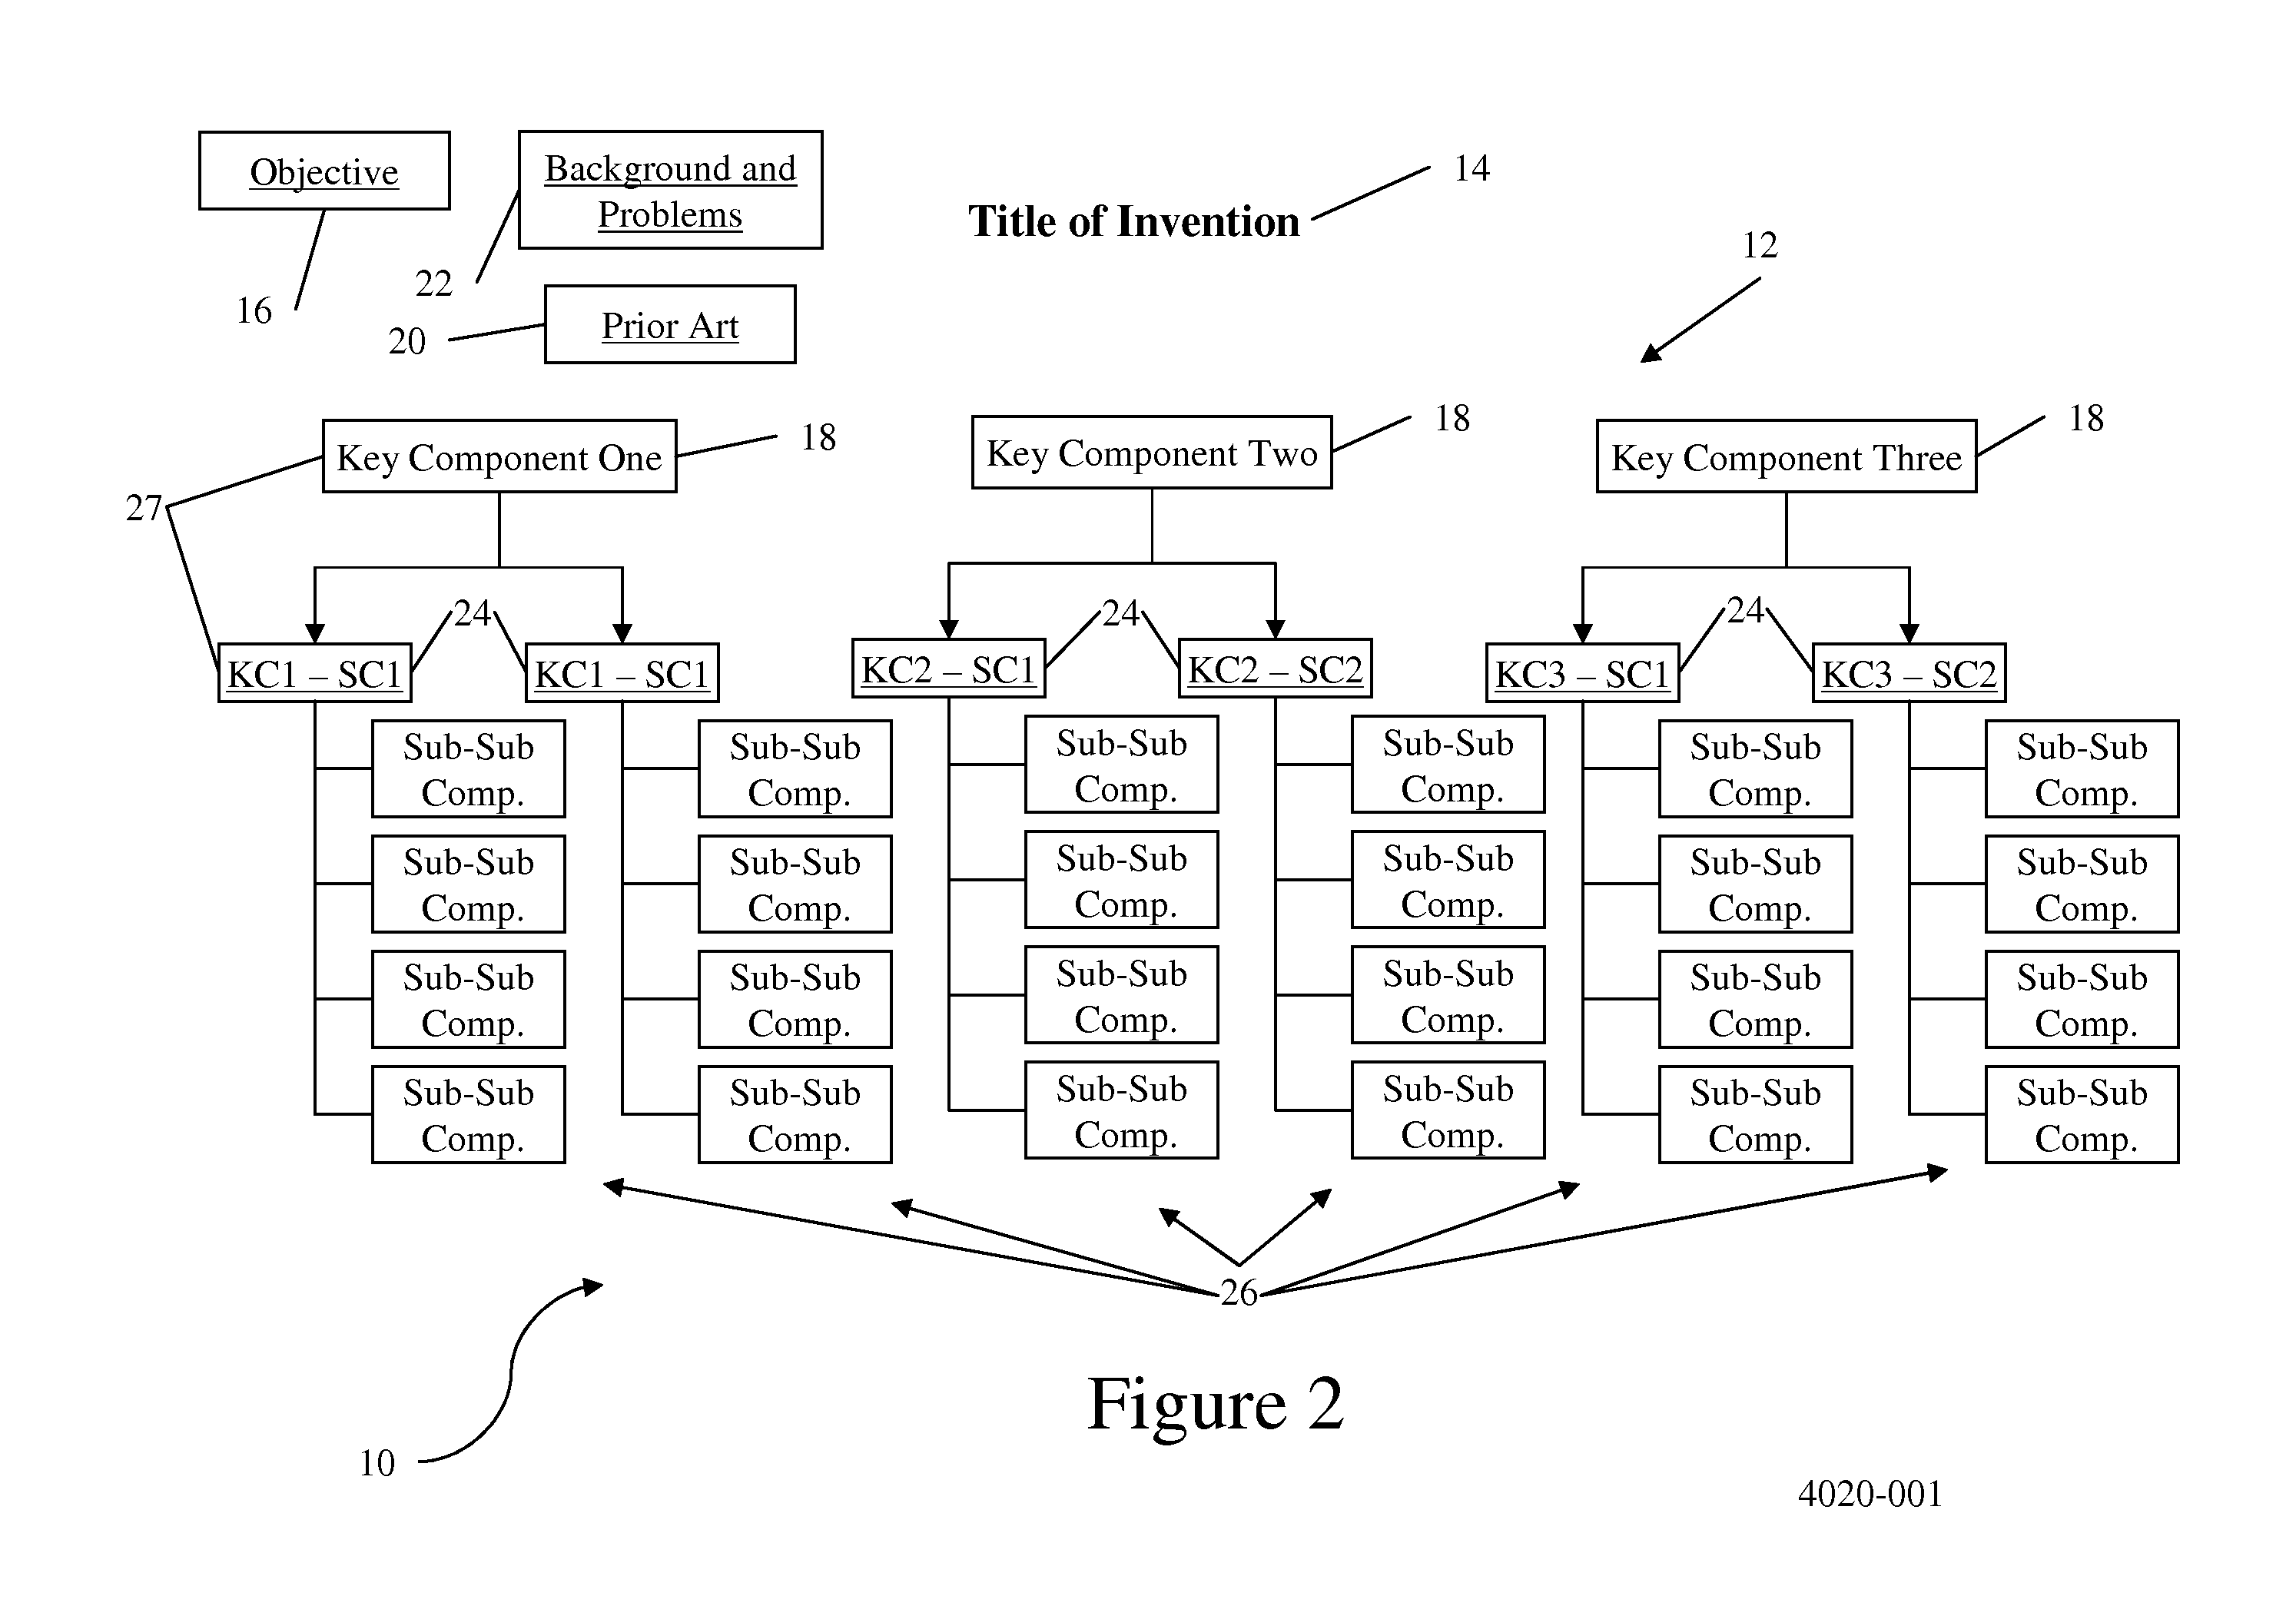 Automated system and method for patent drafting and technology assessment